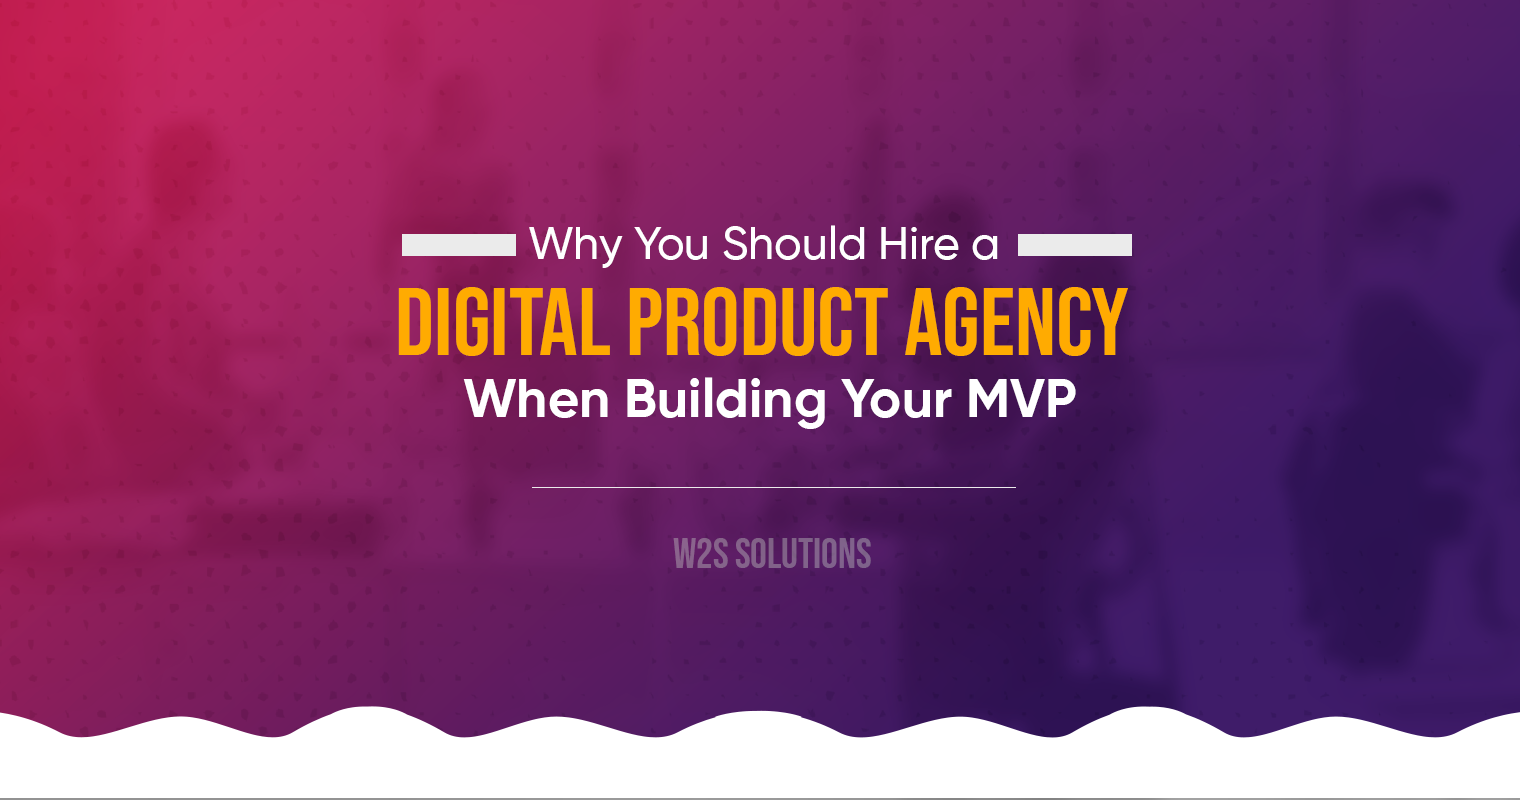 Why do you need a digital product agency to develop your MVP?